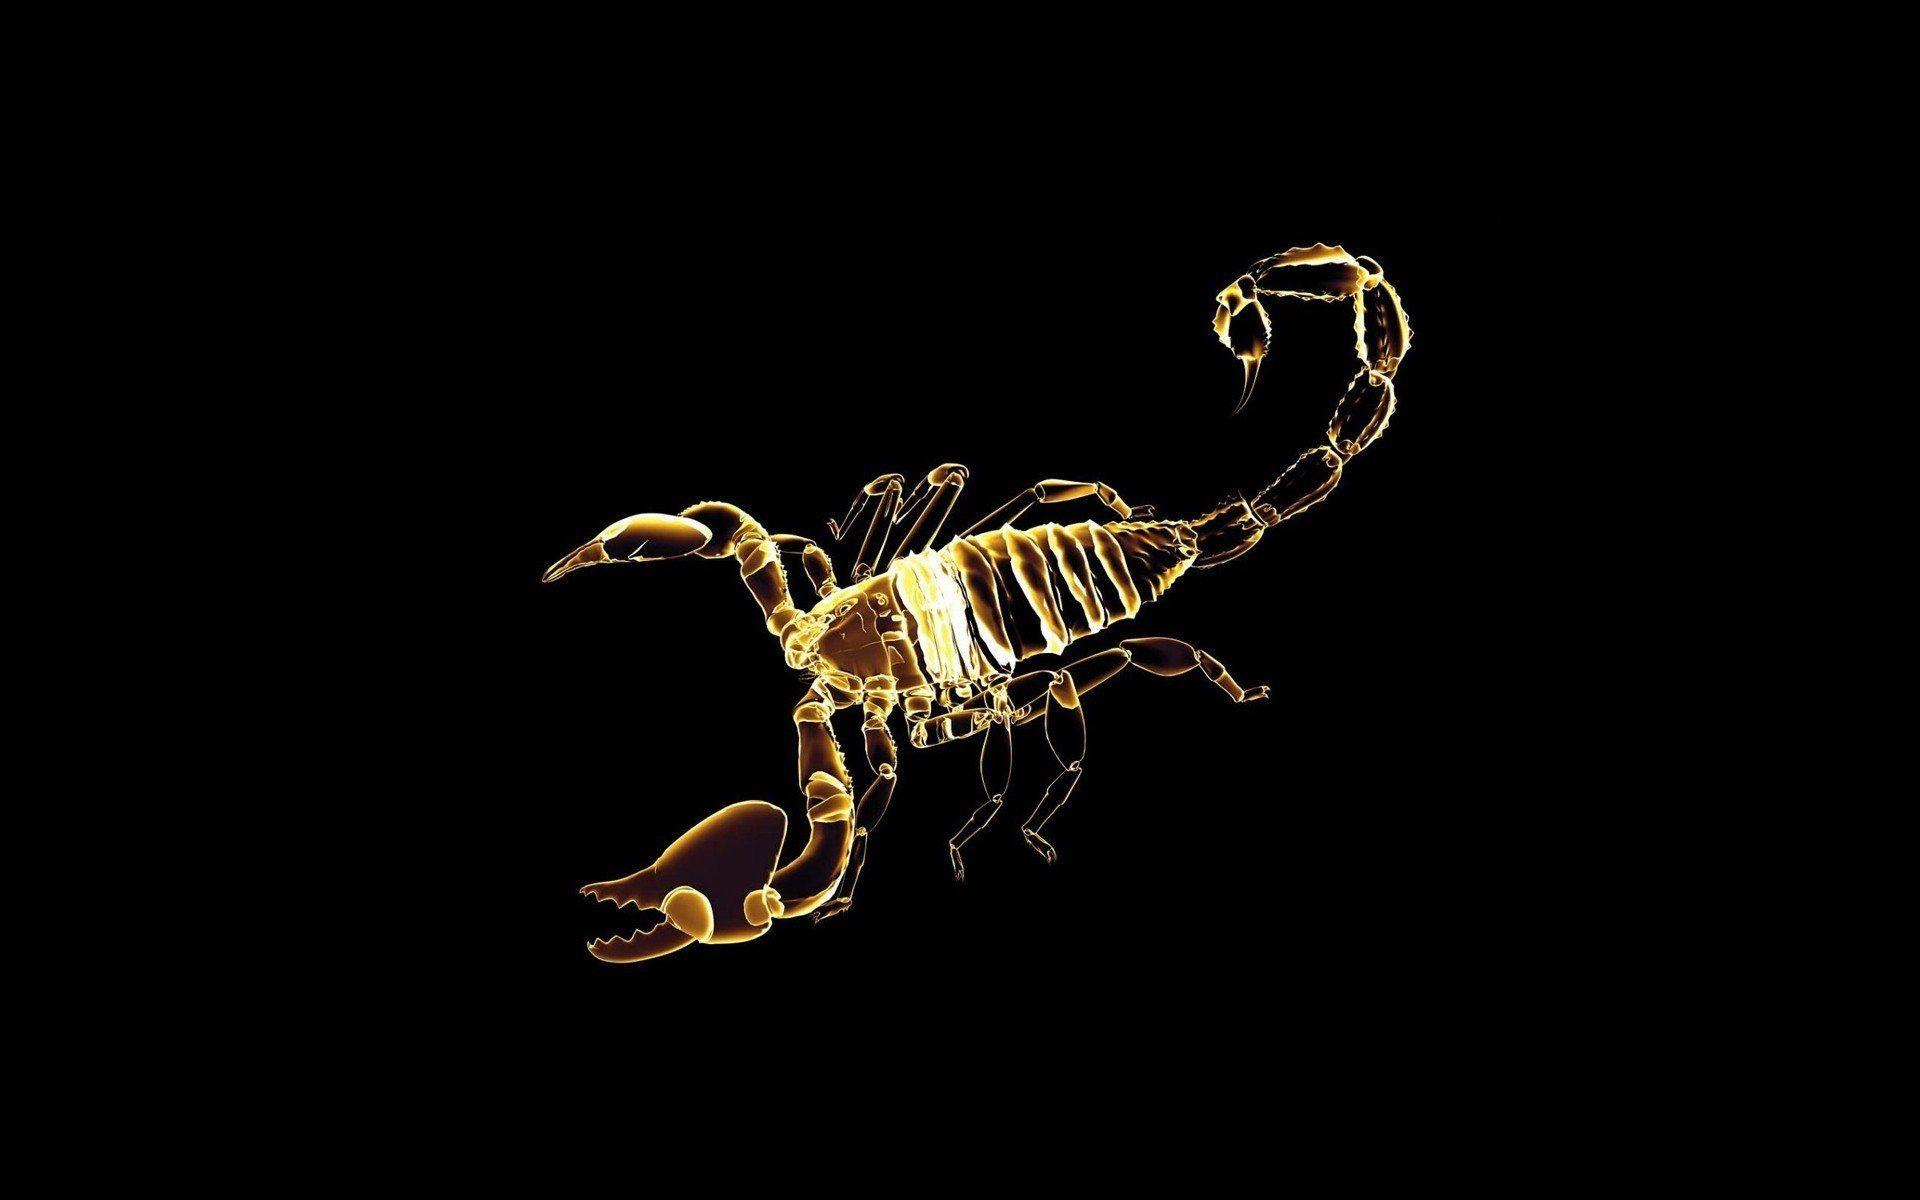 Scorpion Full HD Wallpaper and Background Imagex1200